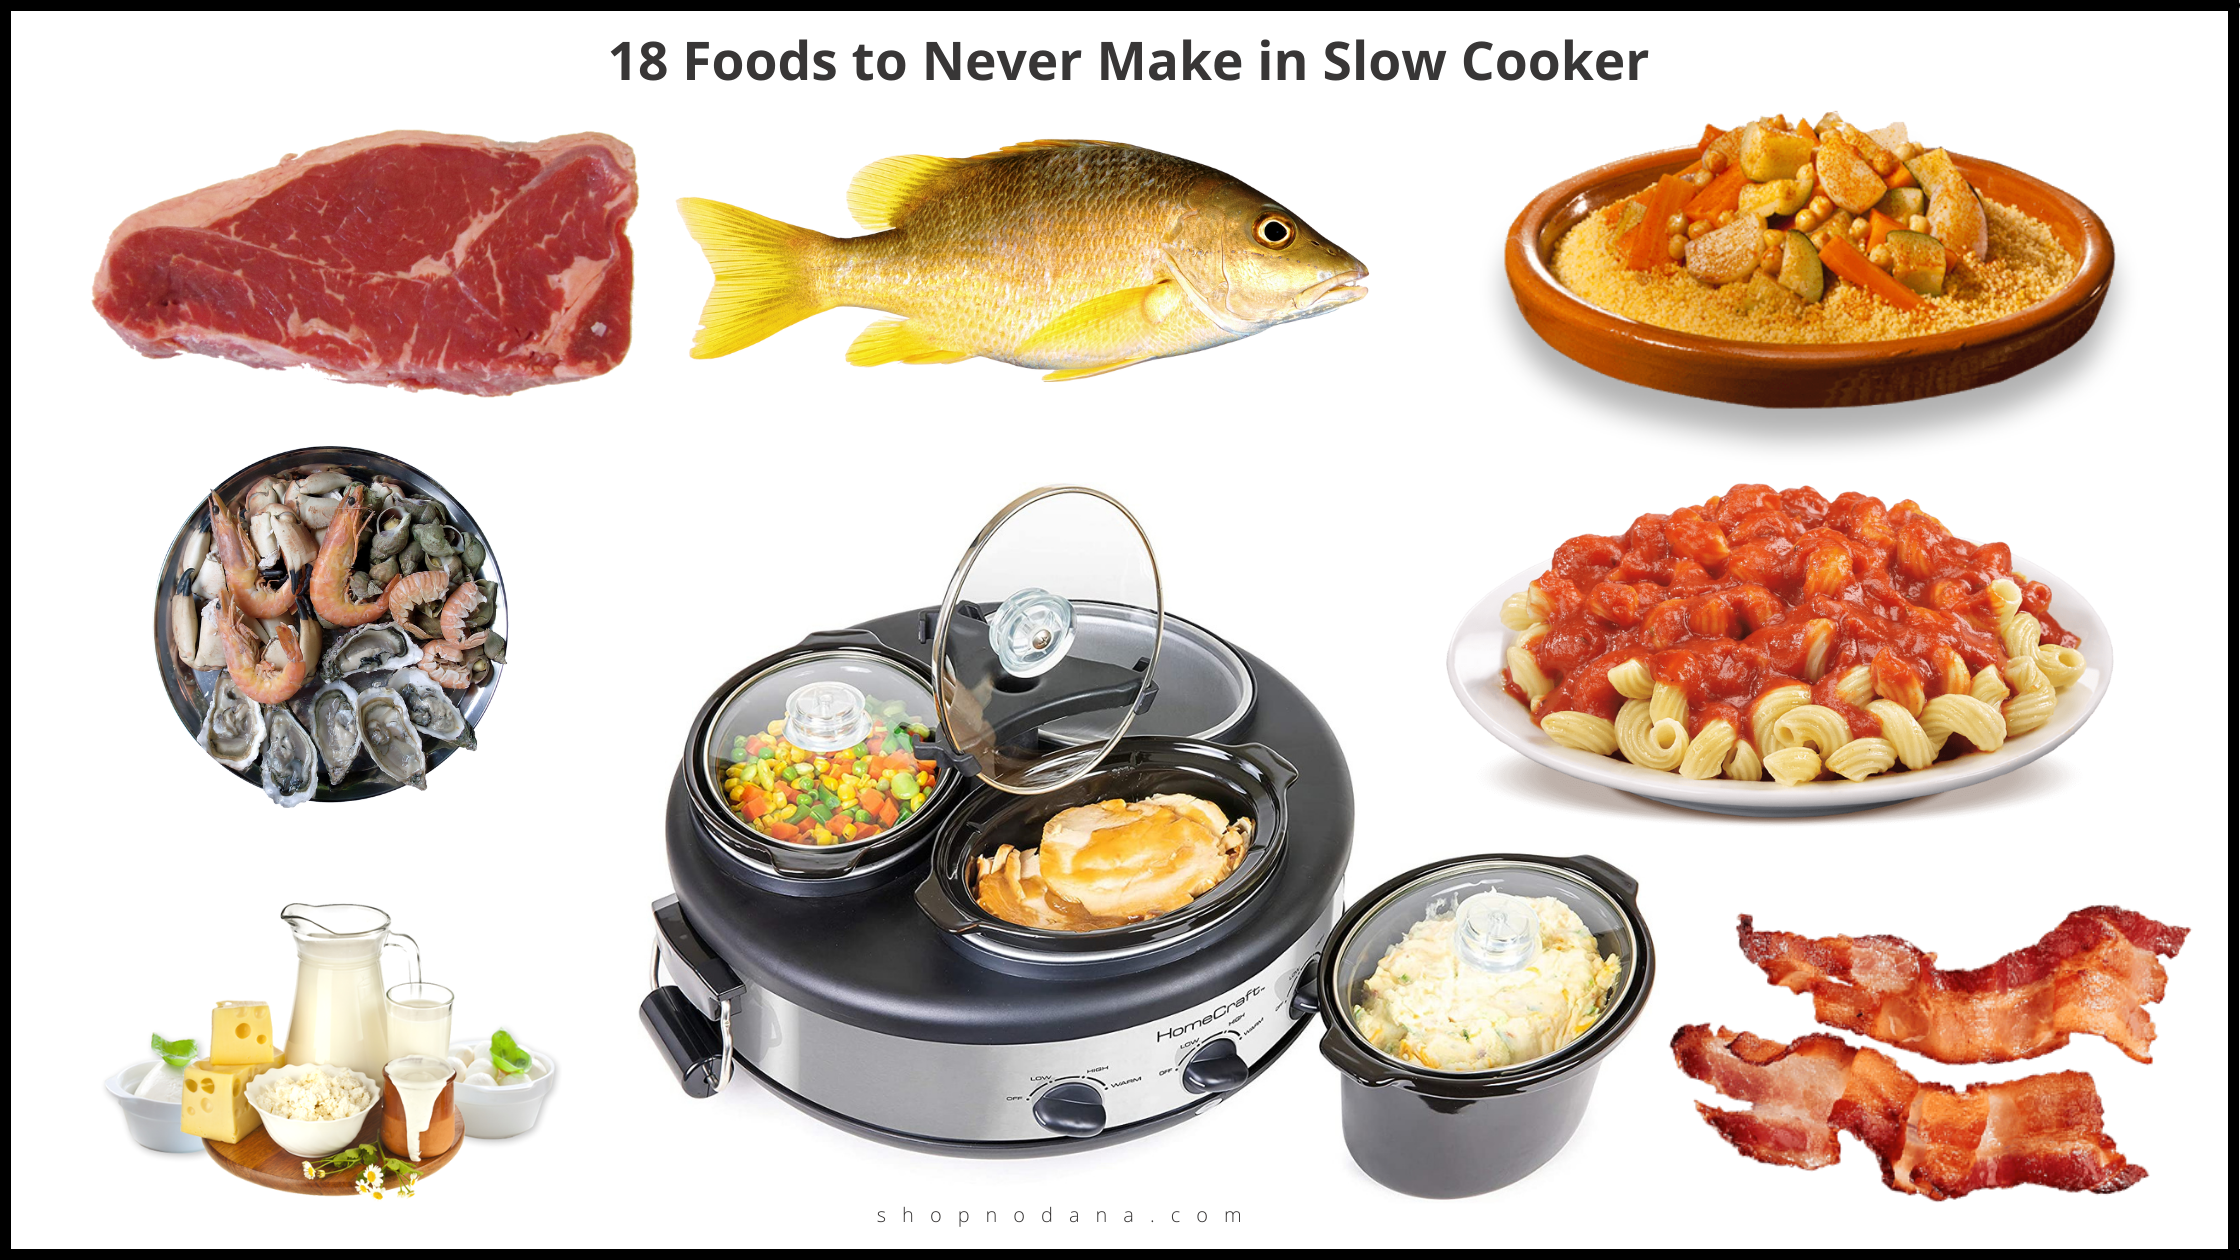 18 Foods to Never Make in Slow Cooker